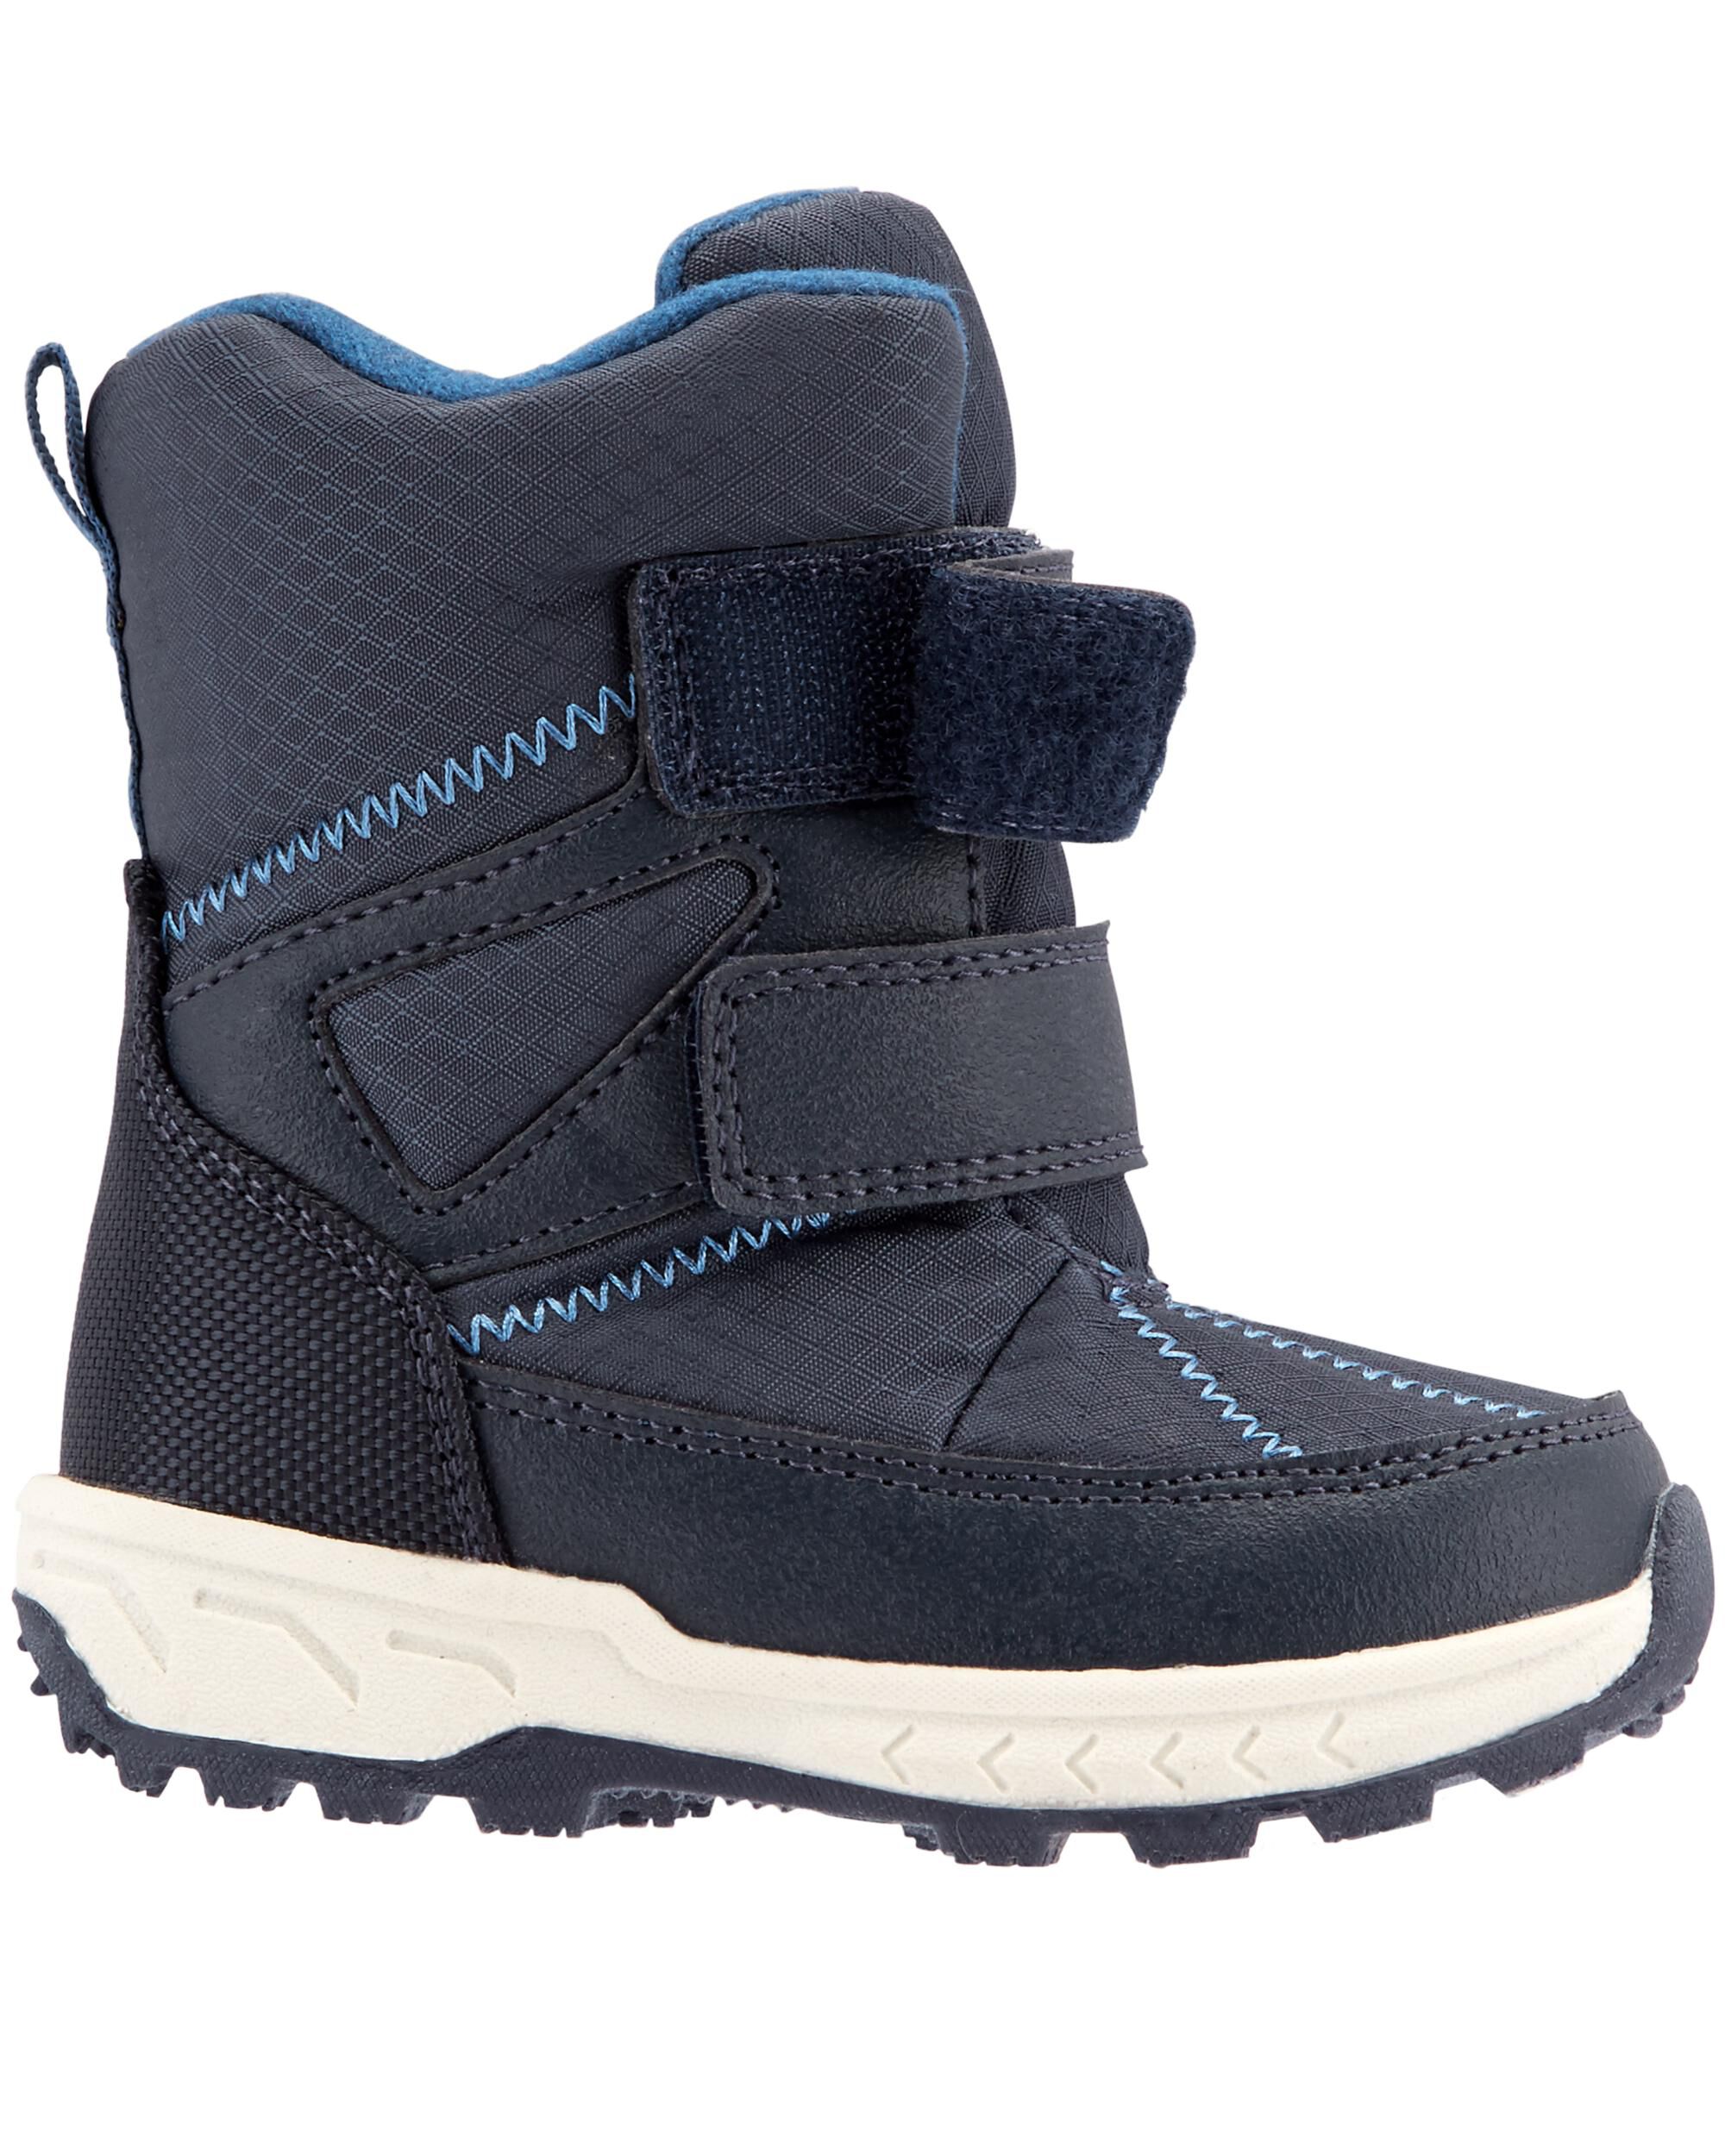 carters boys snow boots